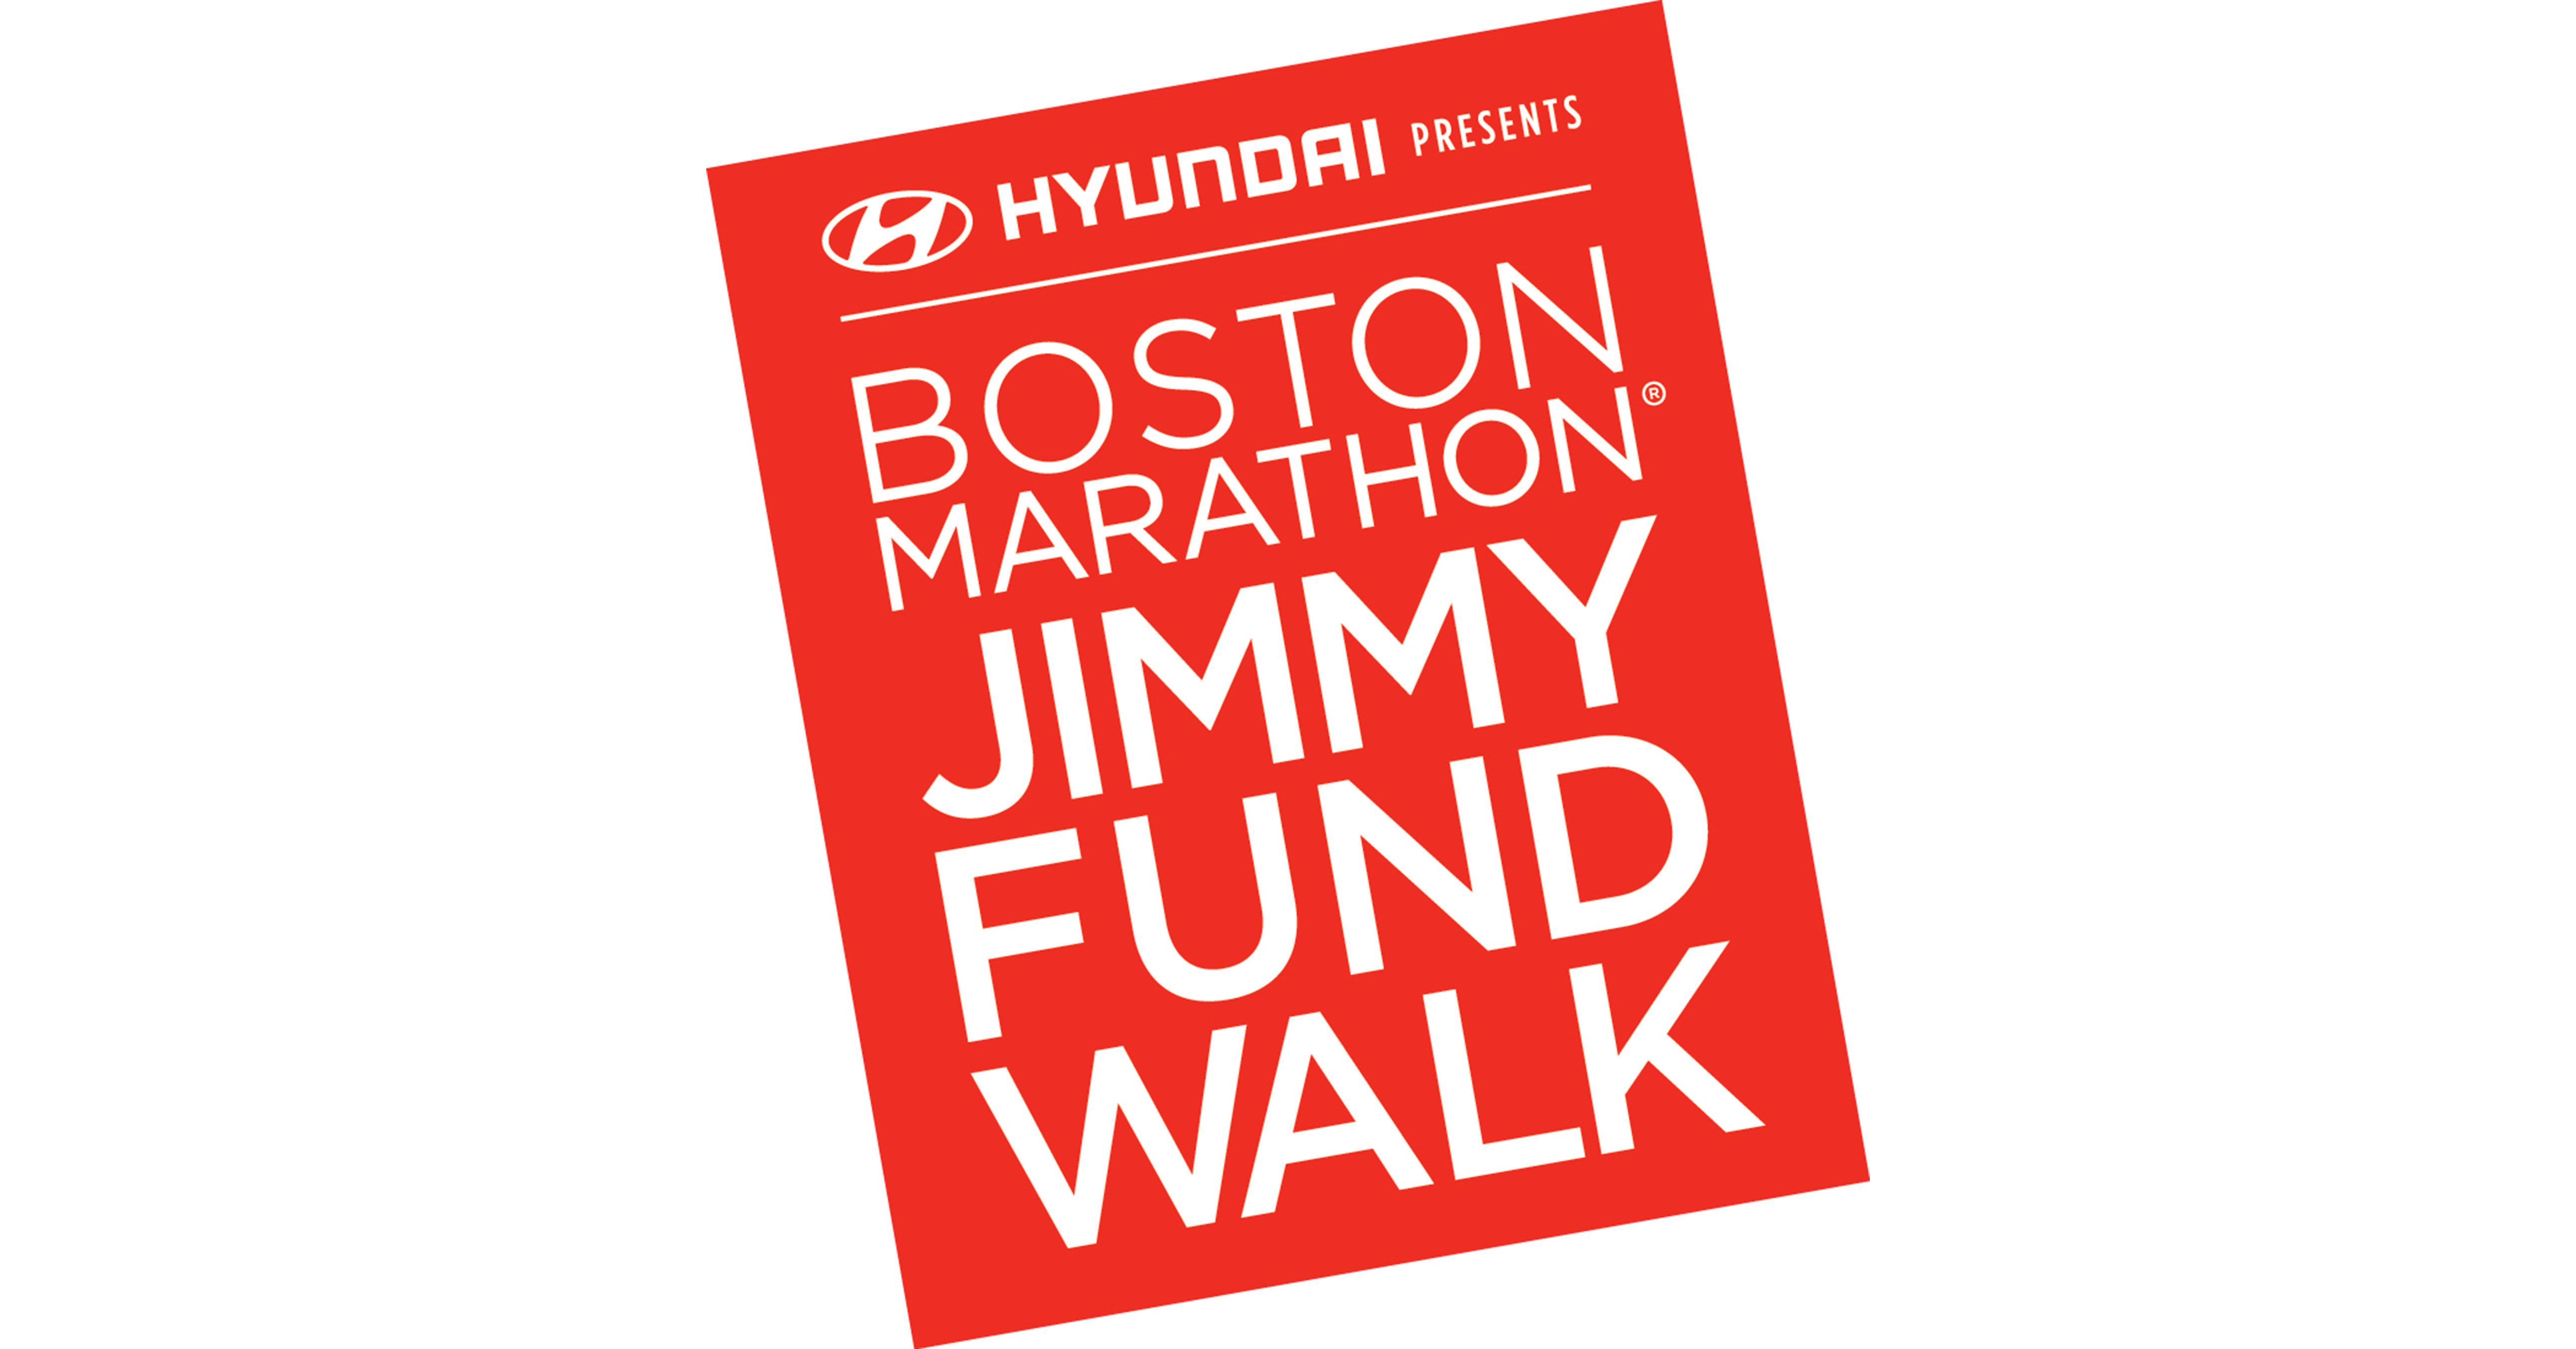 Call for Walkers Registration open for the Boston Marathon® Jimmy Fund